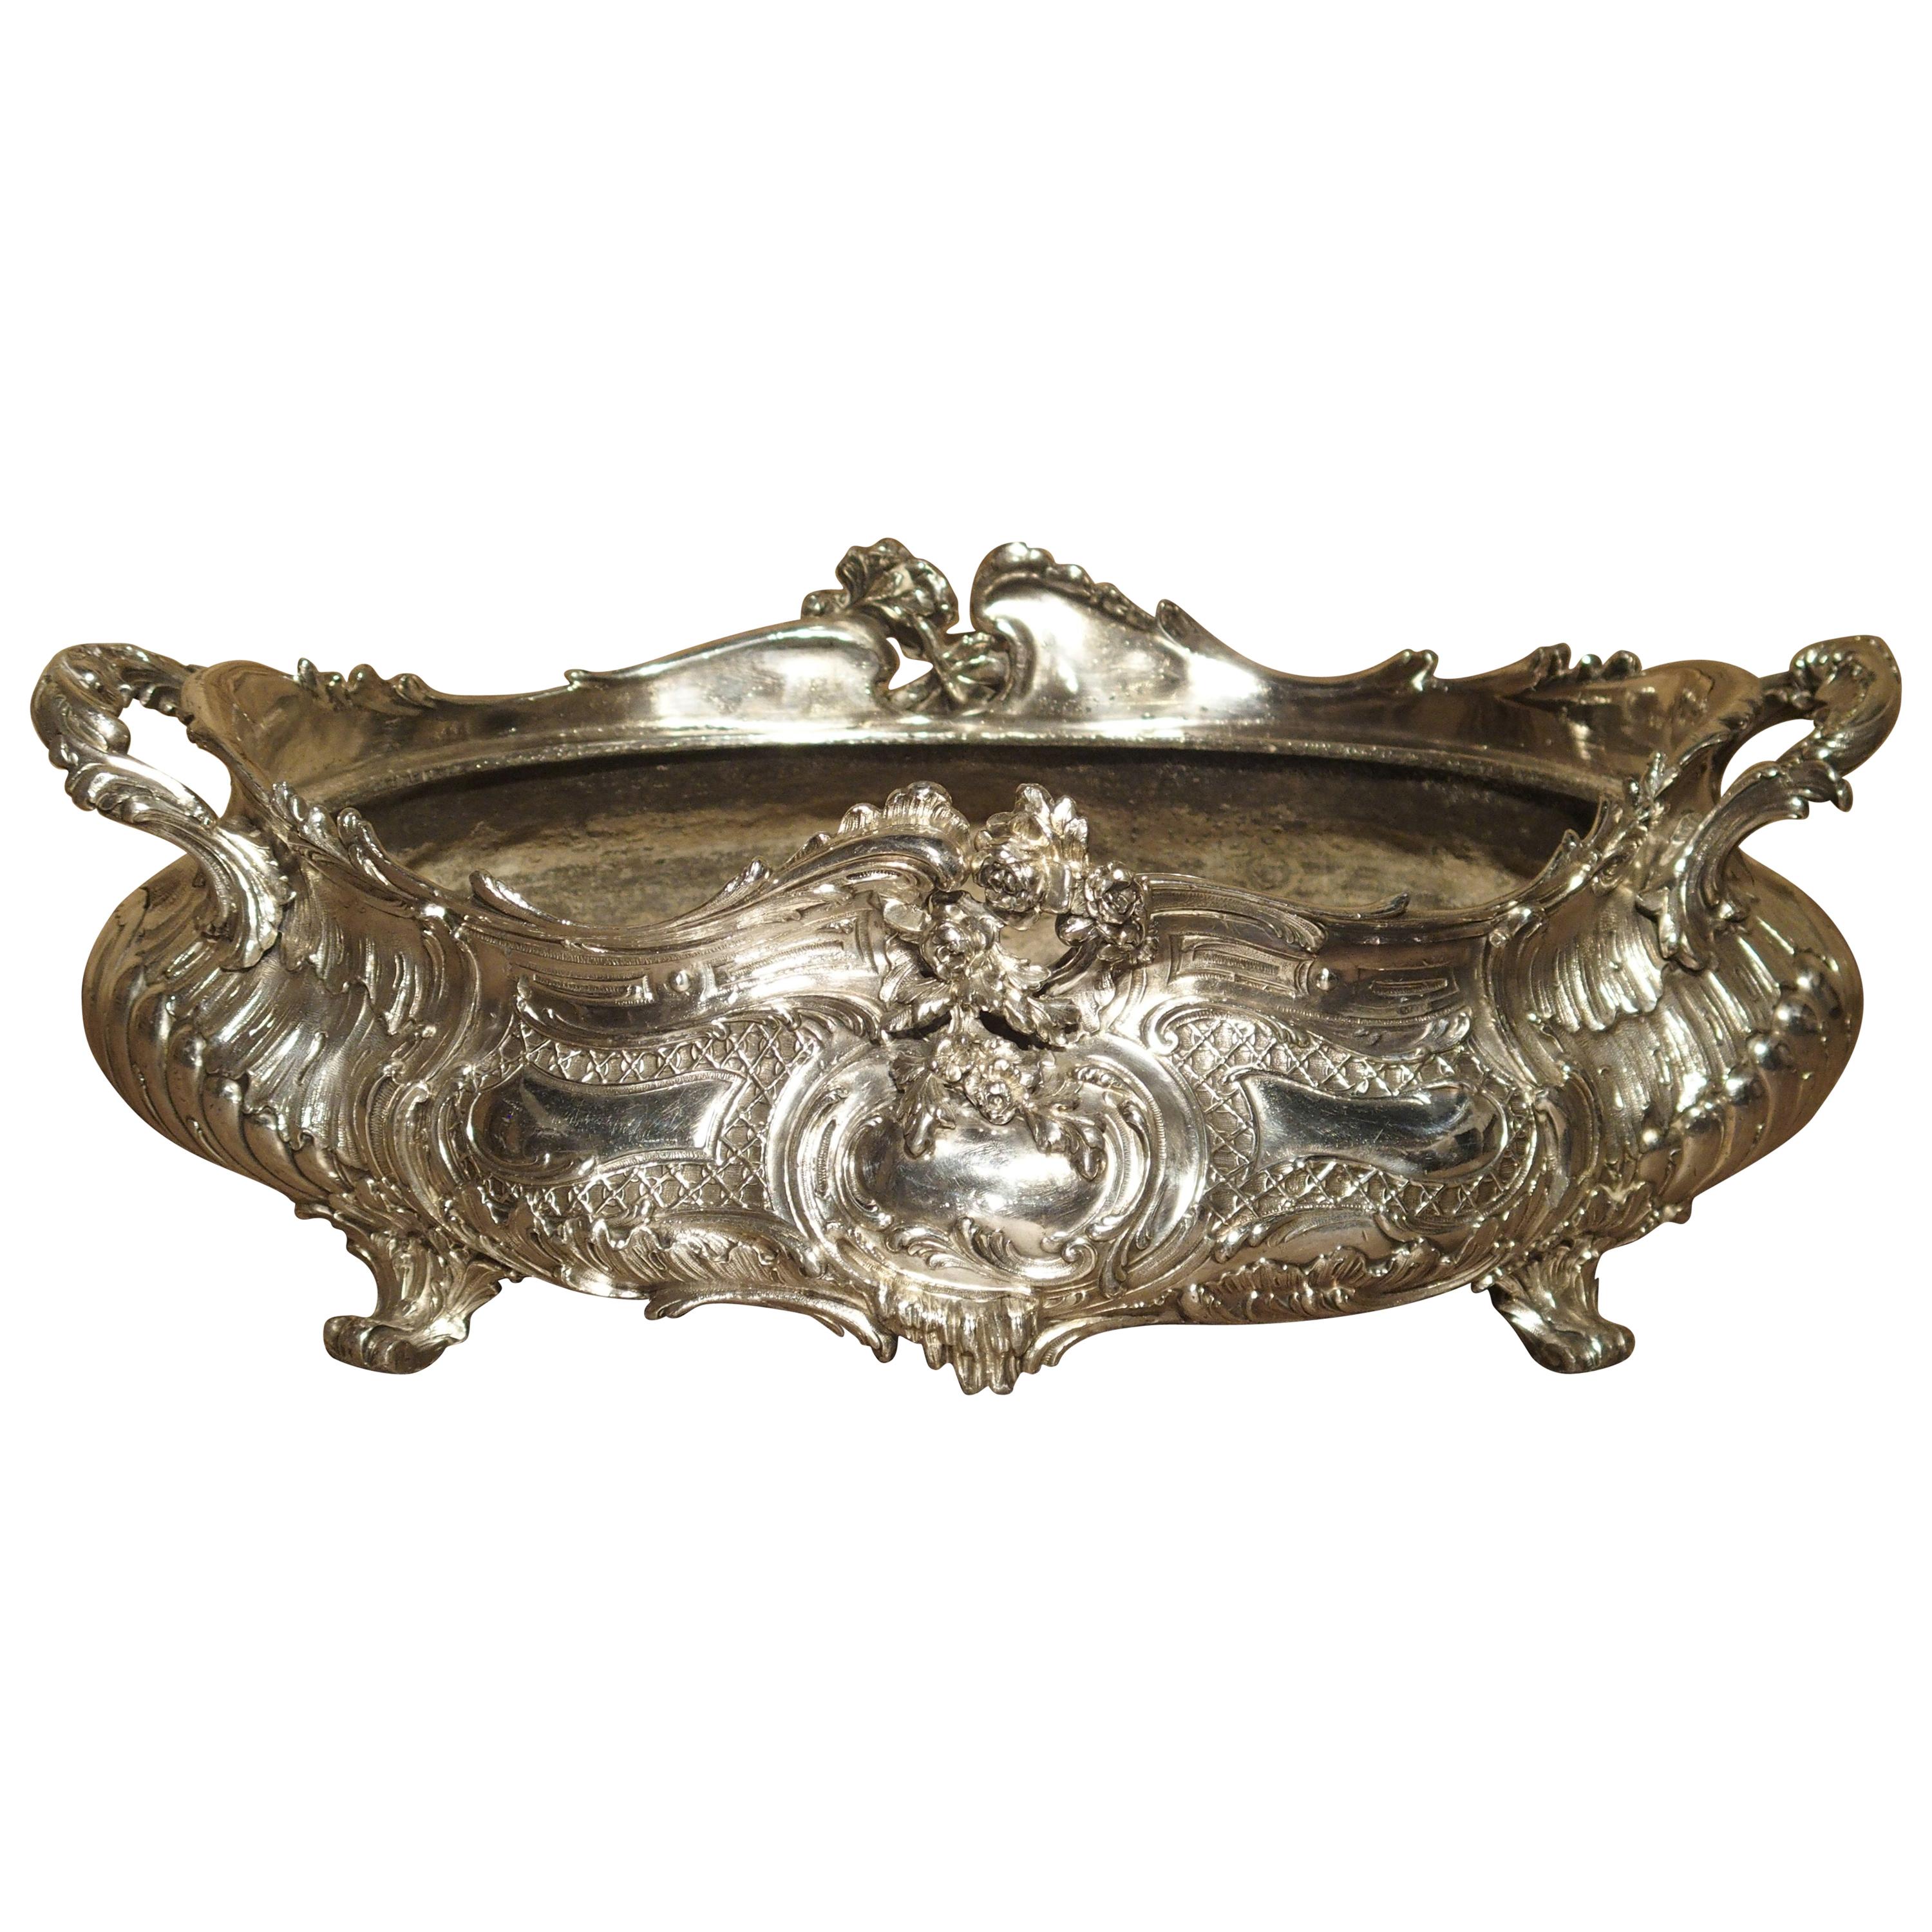 Antique Silvered Bronze Jardinière from France, 19th Century